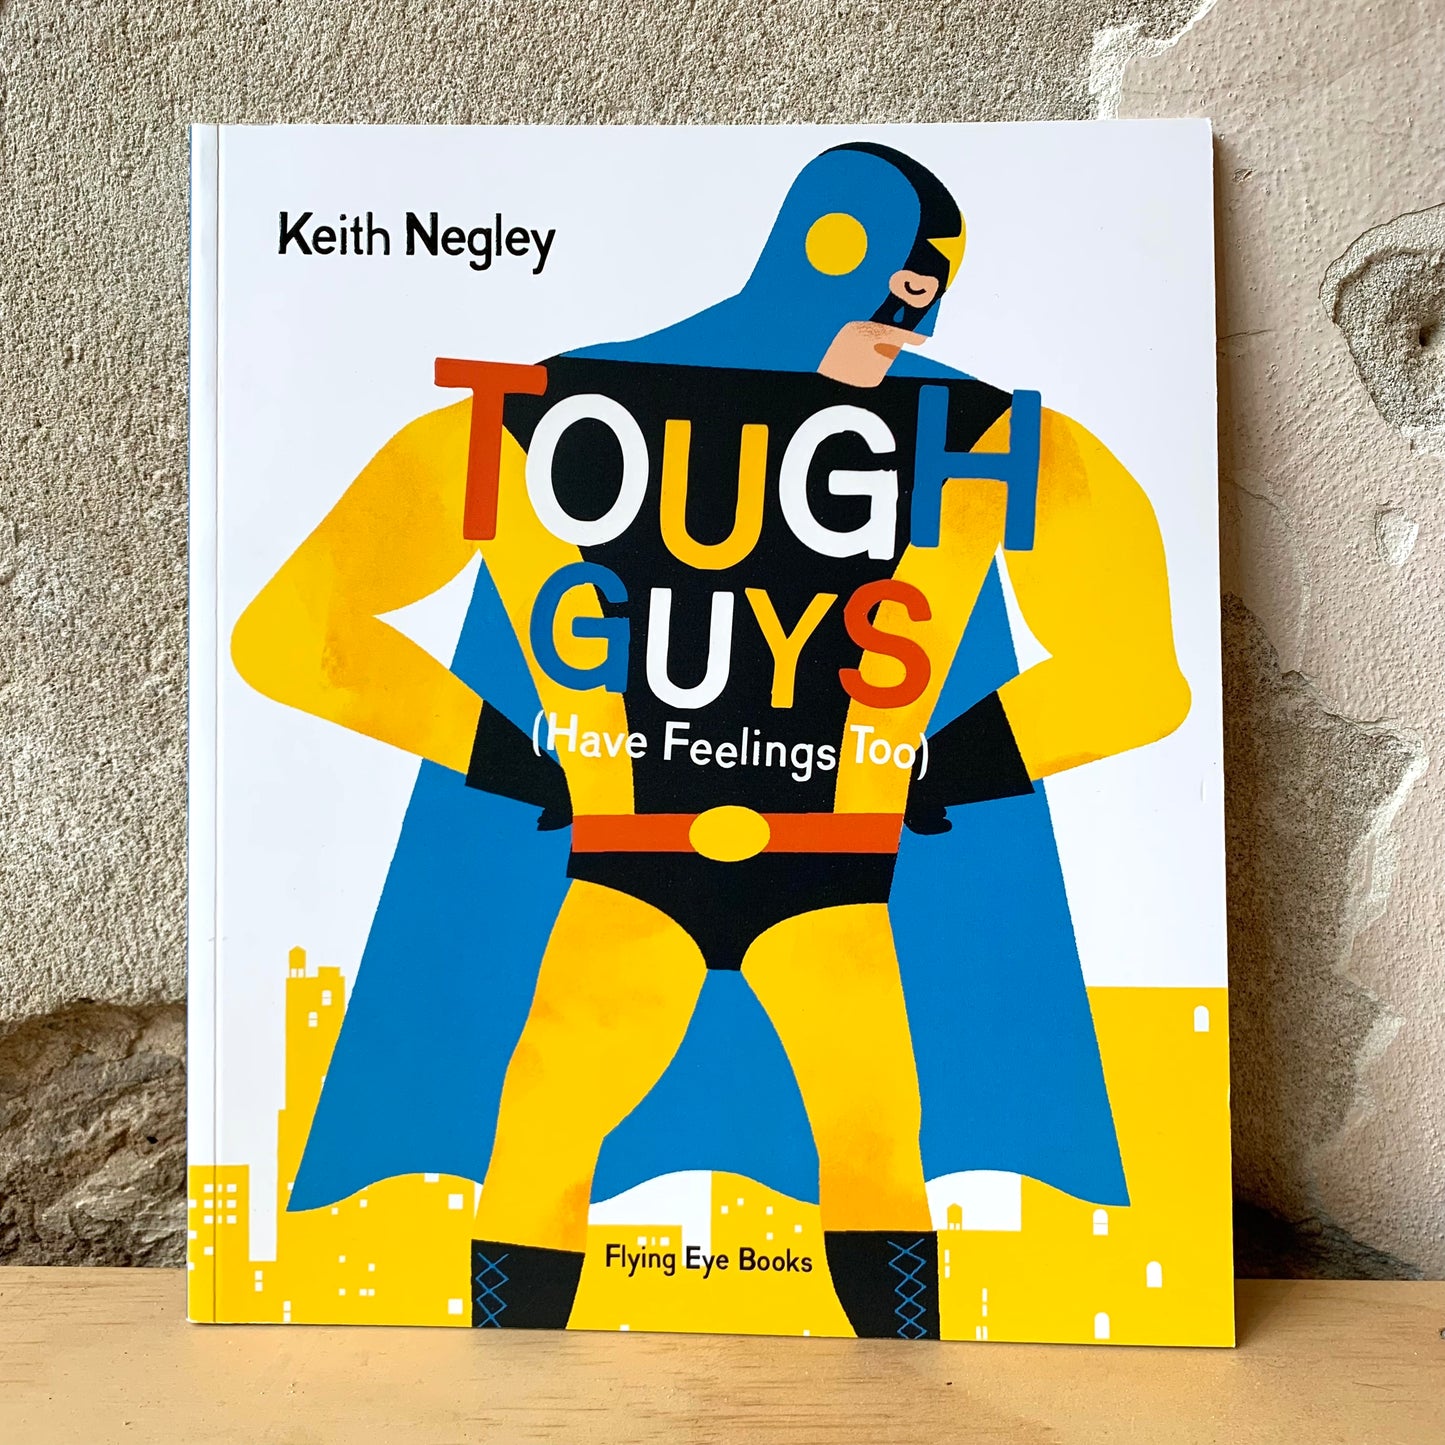 Tough Guys (Have Feelings Too) – Keith Negley